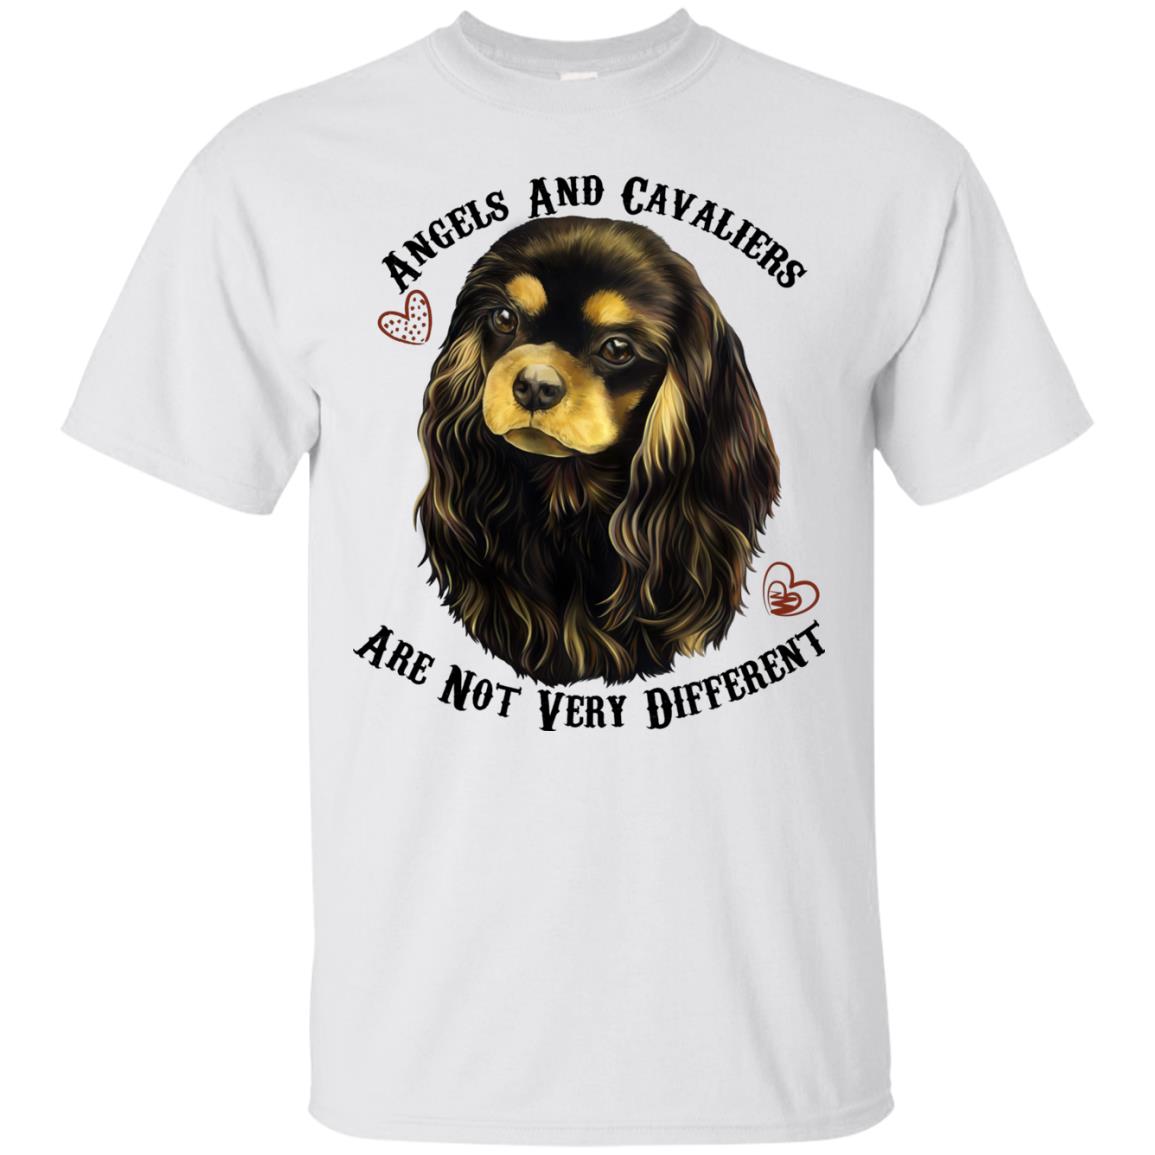 Cavalier King Charles Spaniel Black and Tan Angels T-Shirt - GoneBold.gift